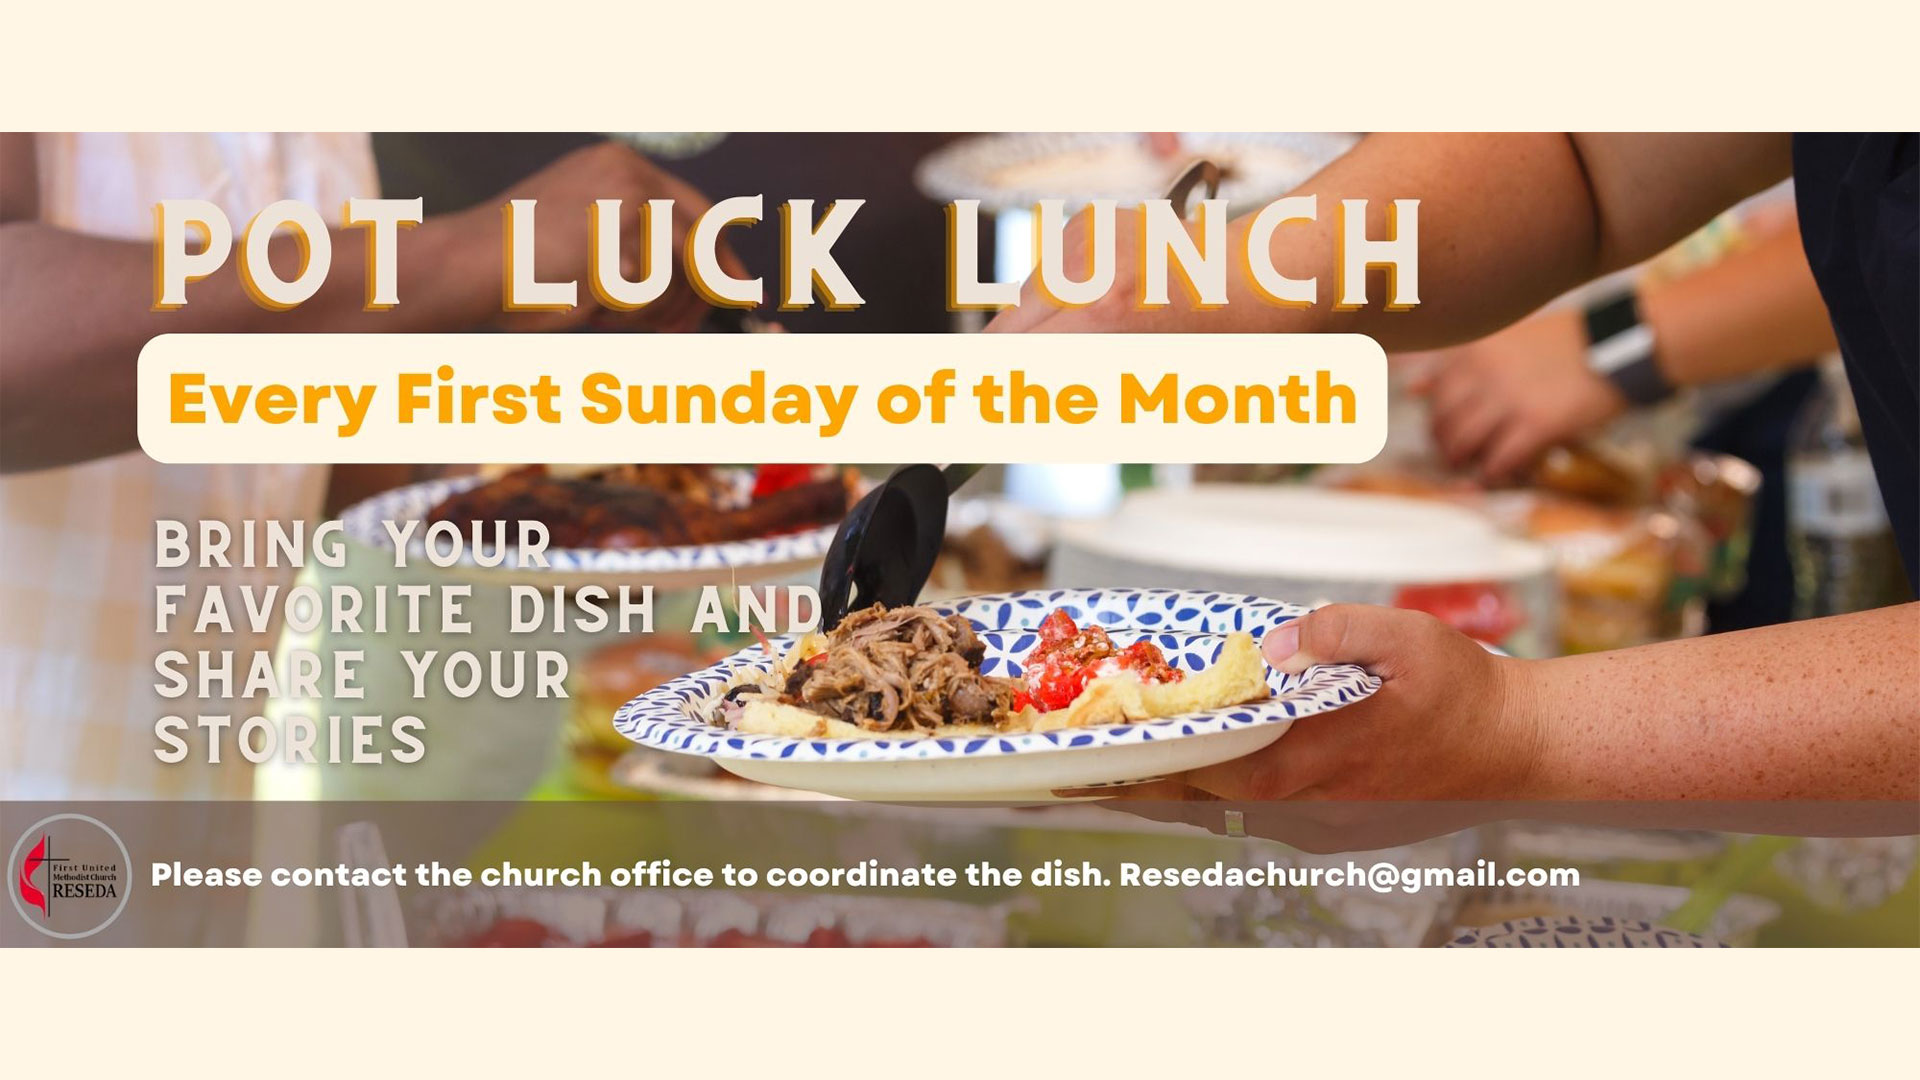 Pot-Luck-Lunch-1ST-SUNDAY-EVERY-OF-THE-MONTH-ResedaUMC